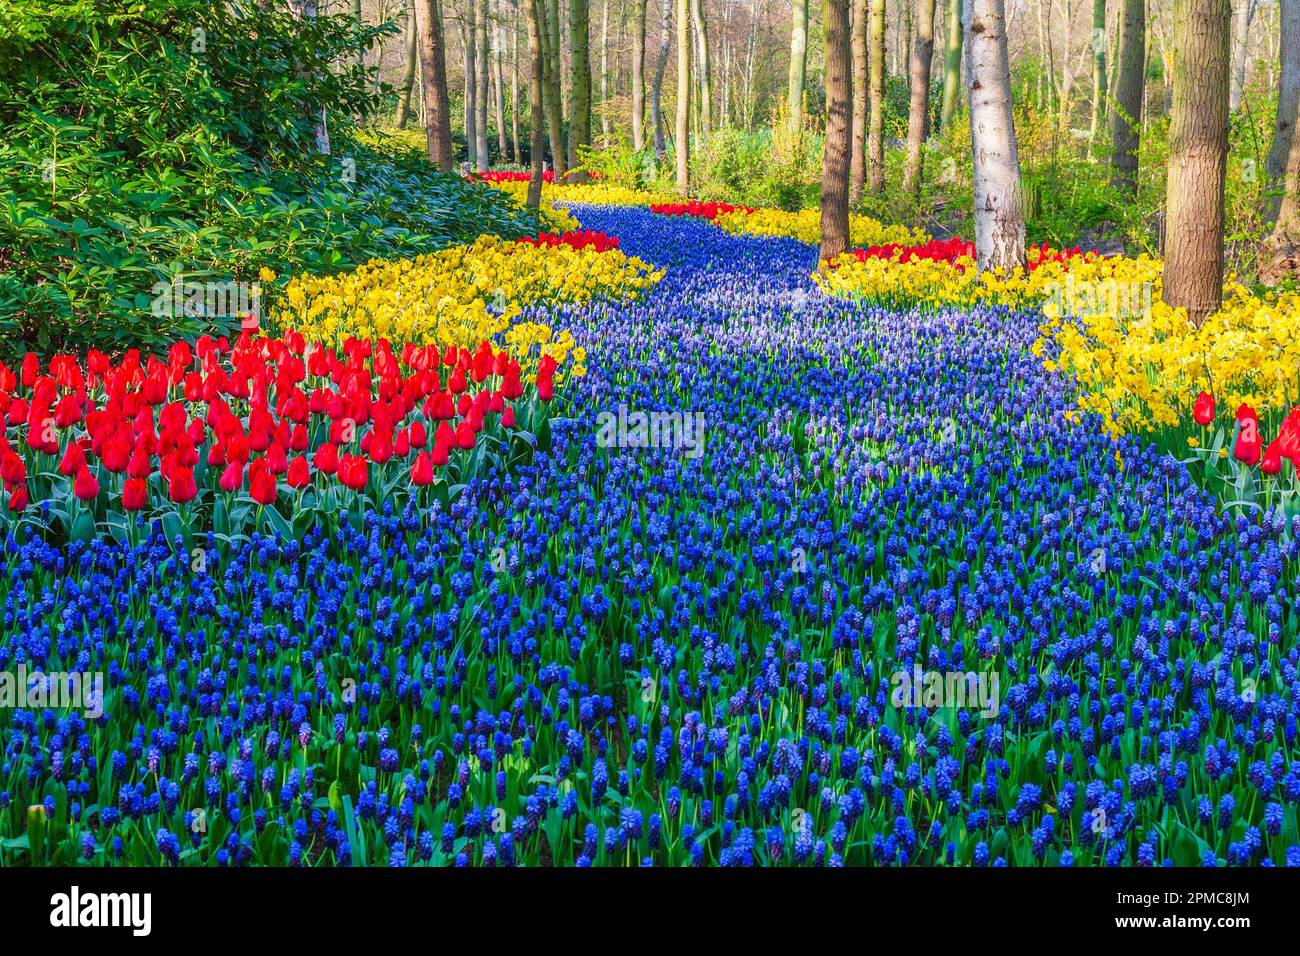 Garden scene with muscari, tulips, and daffodils at Keukenhof Gardens in South Holland in The Netherlands. Stock Photo